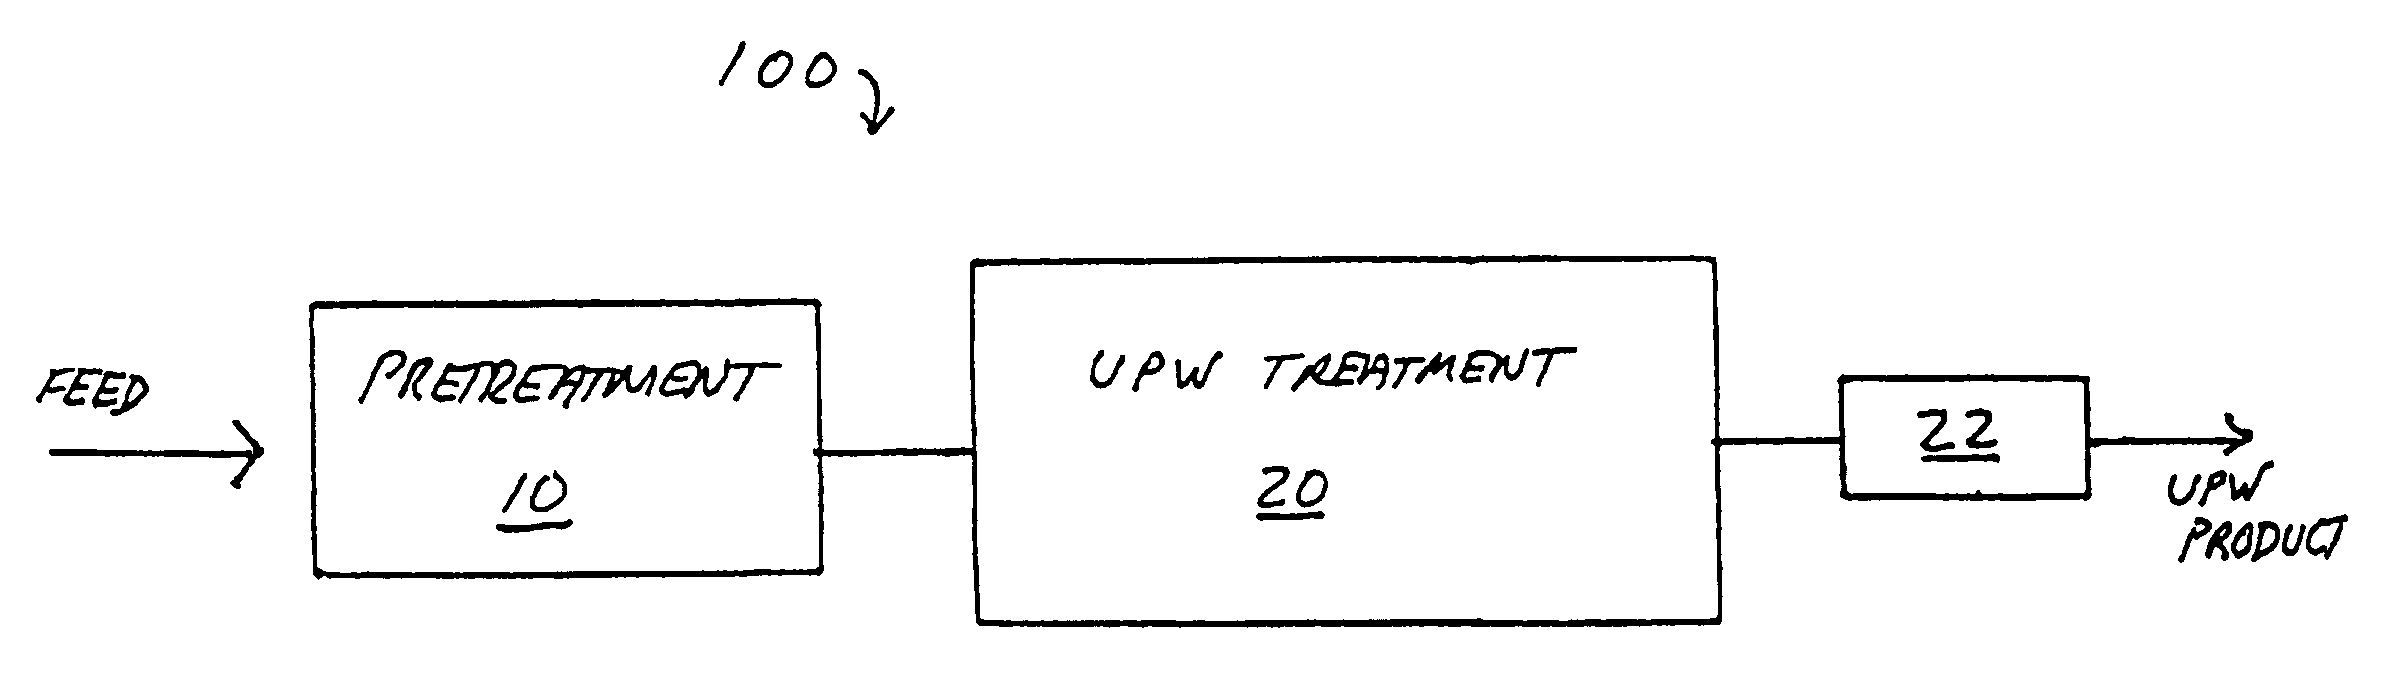 Ion exchange regeneration and upw treatment system